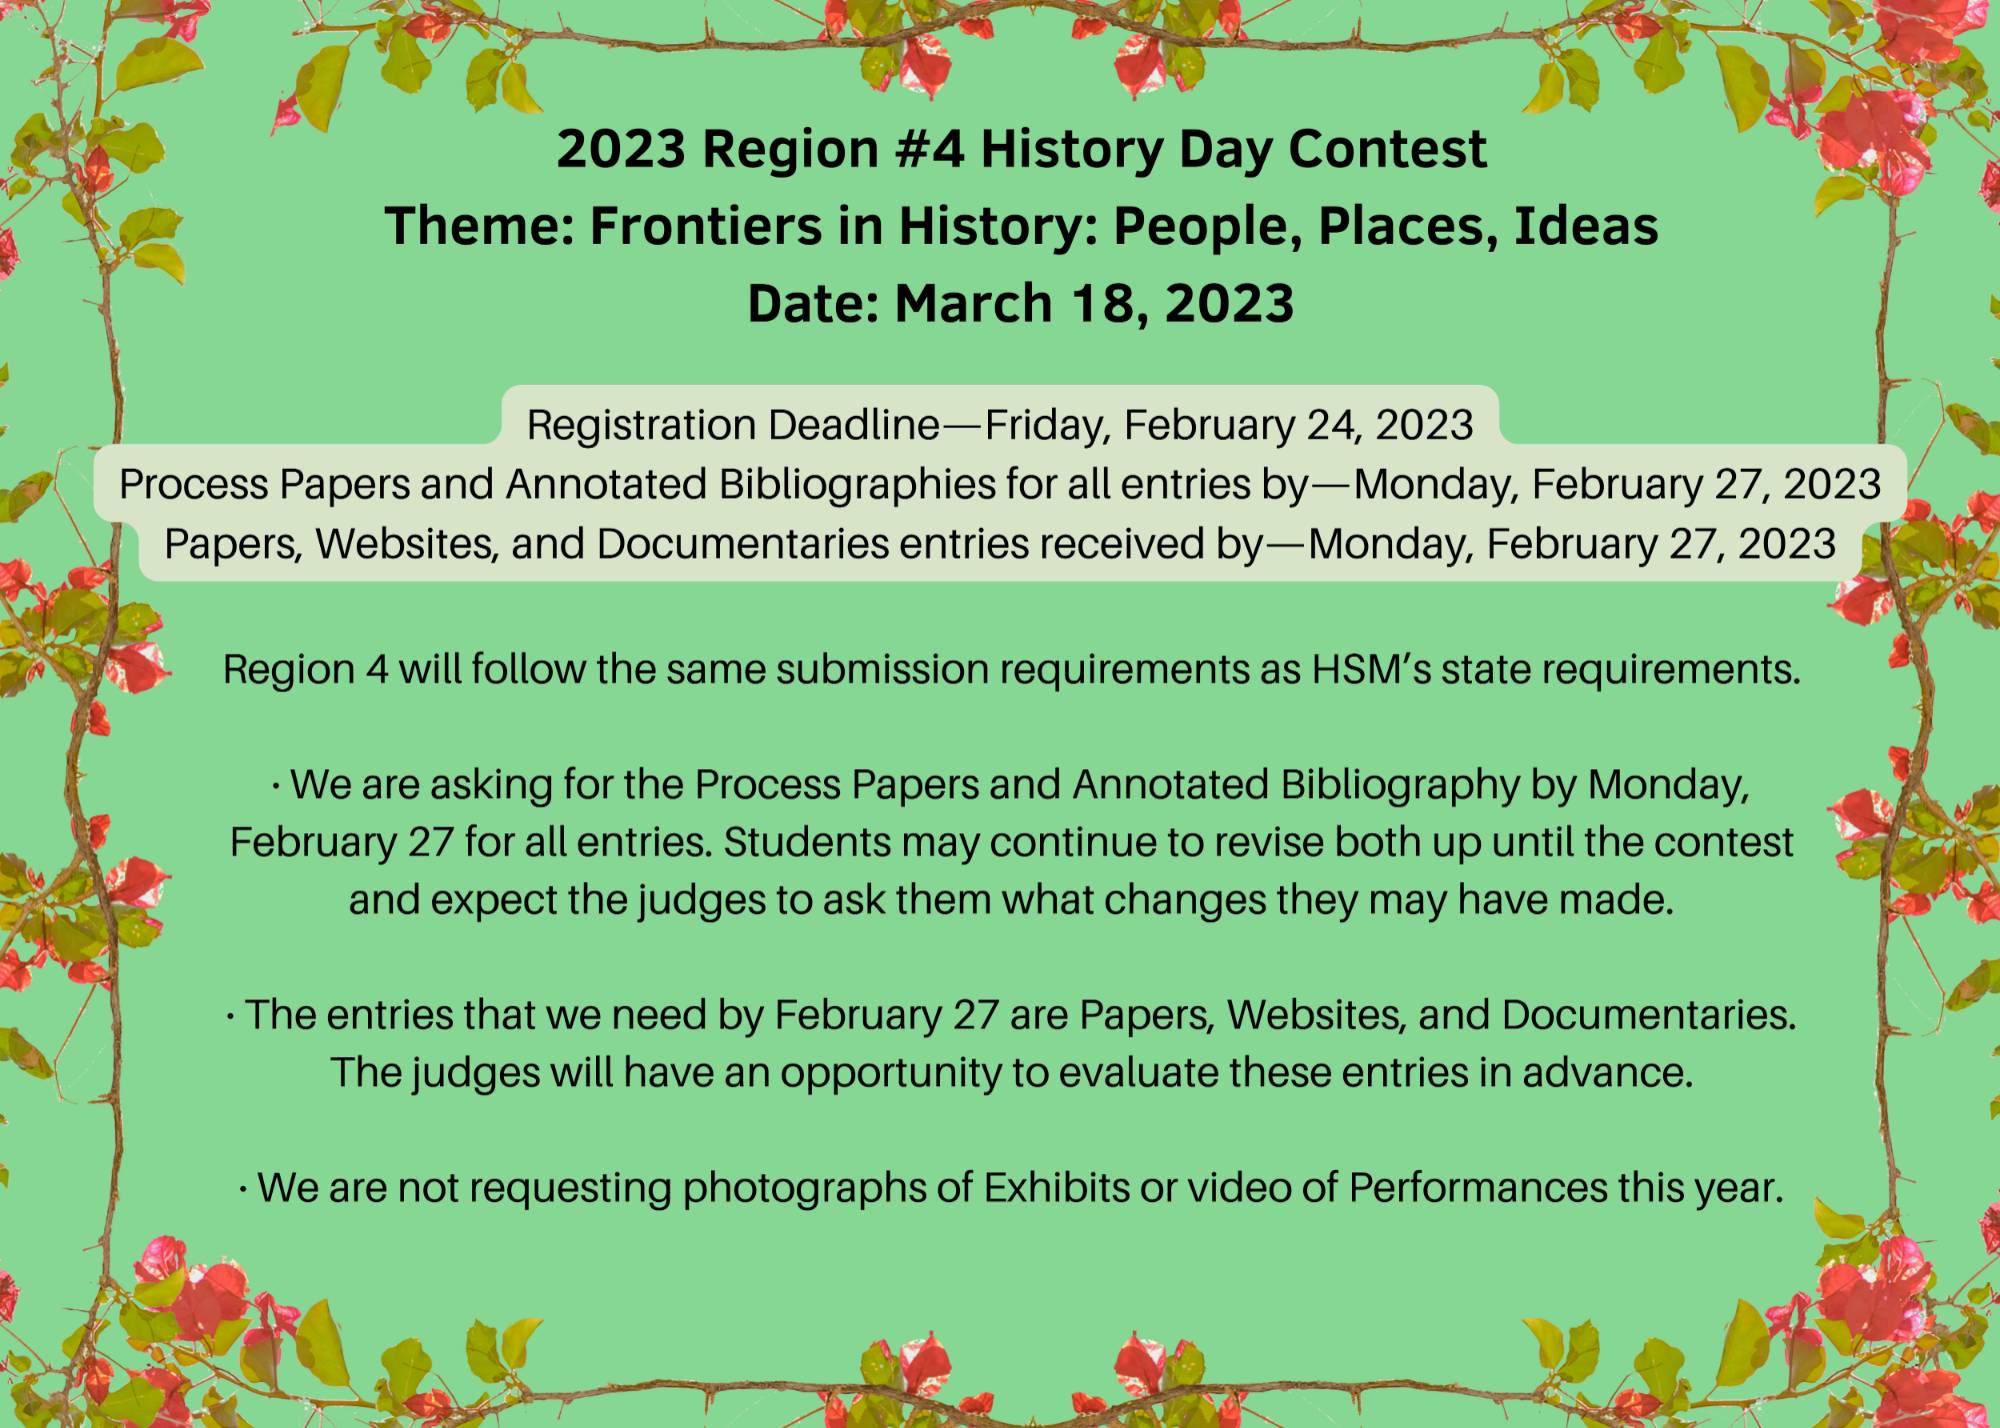 rules and guidelines for 2023 history day